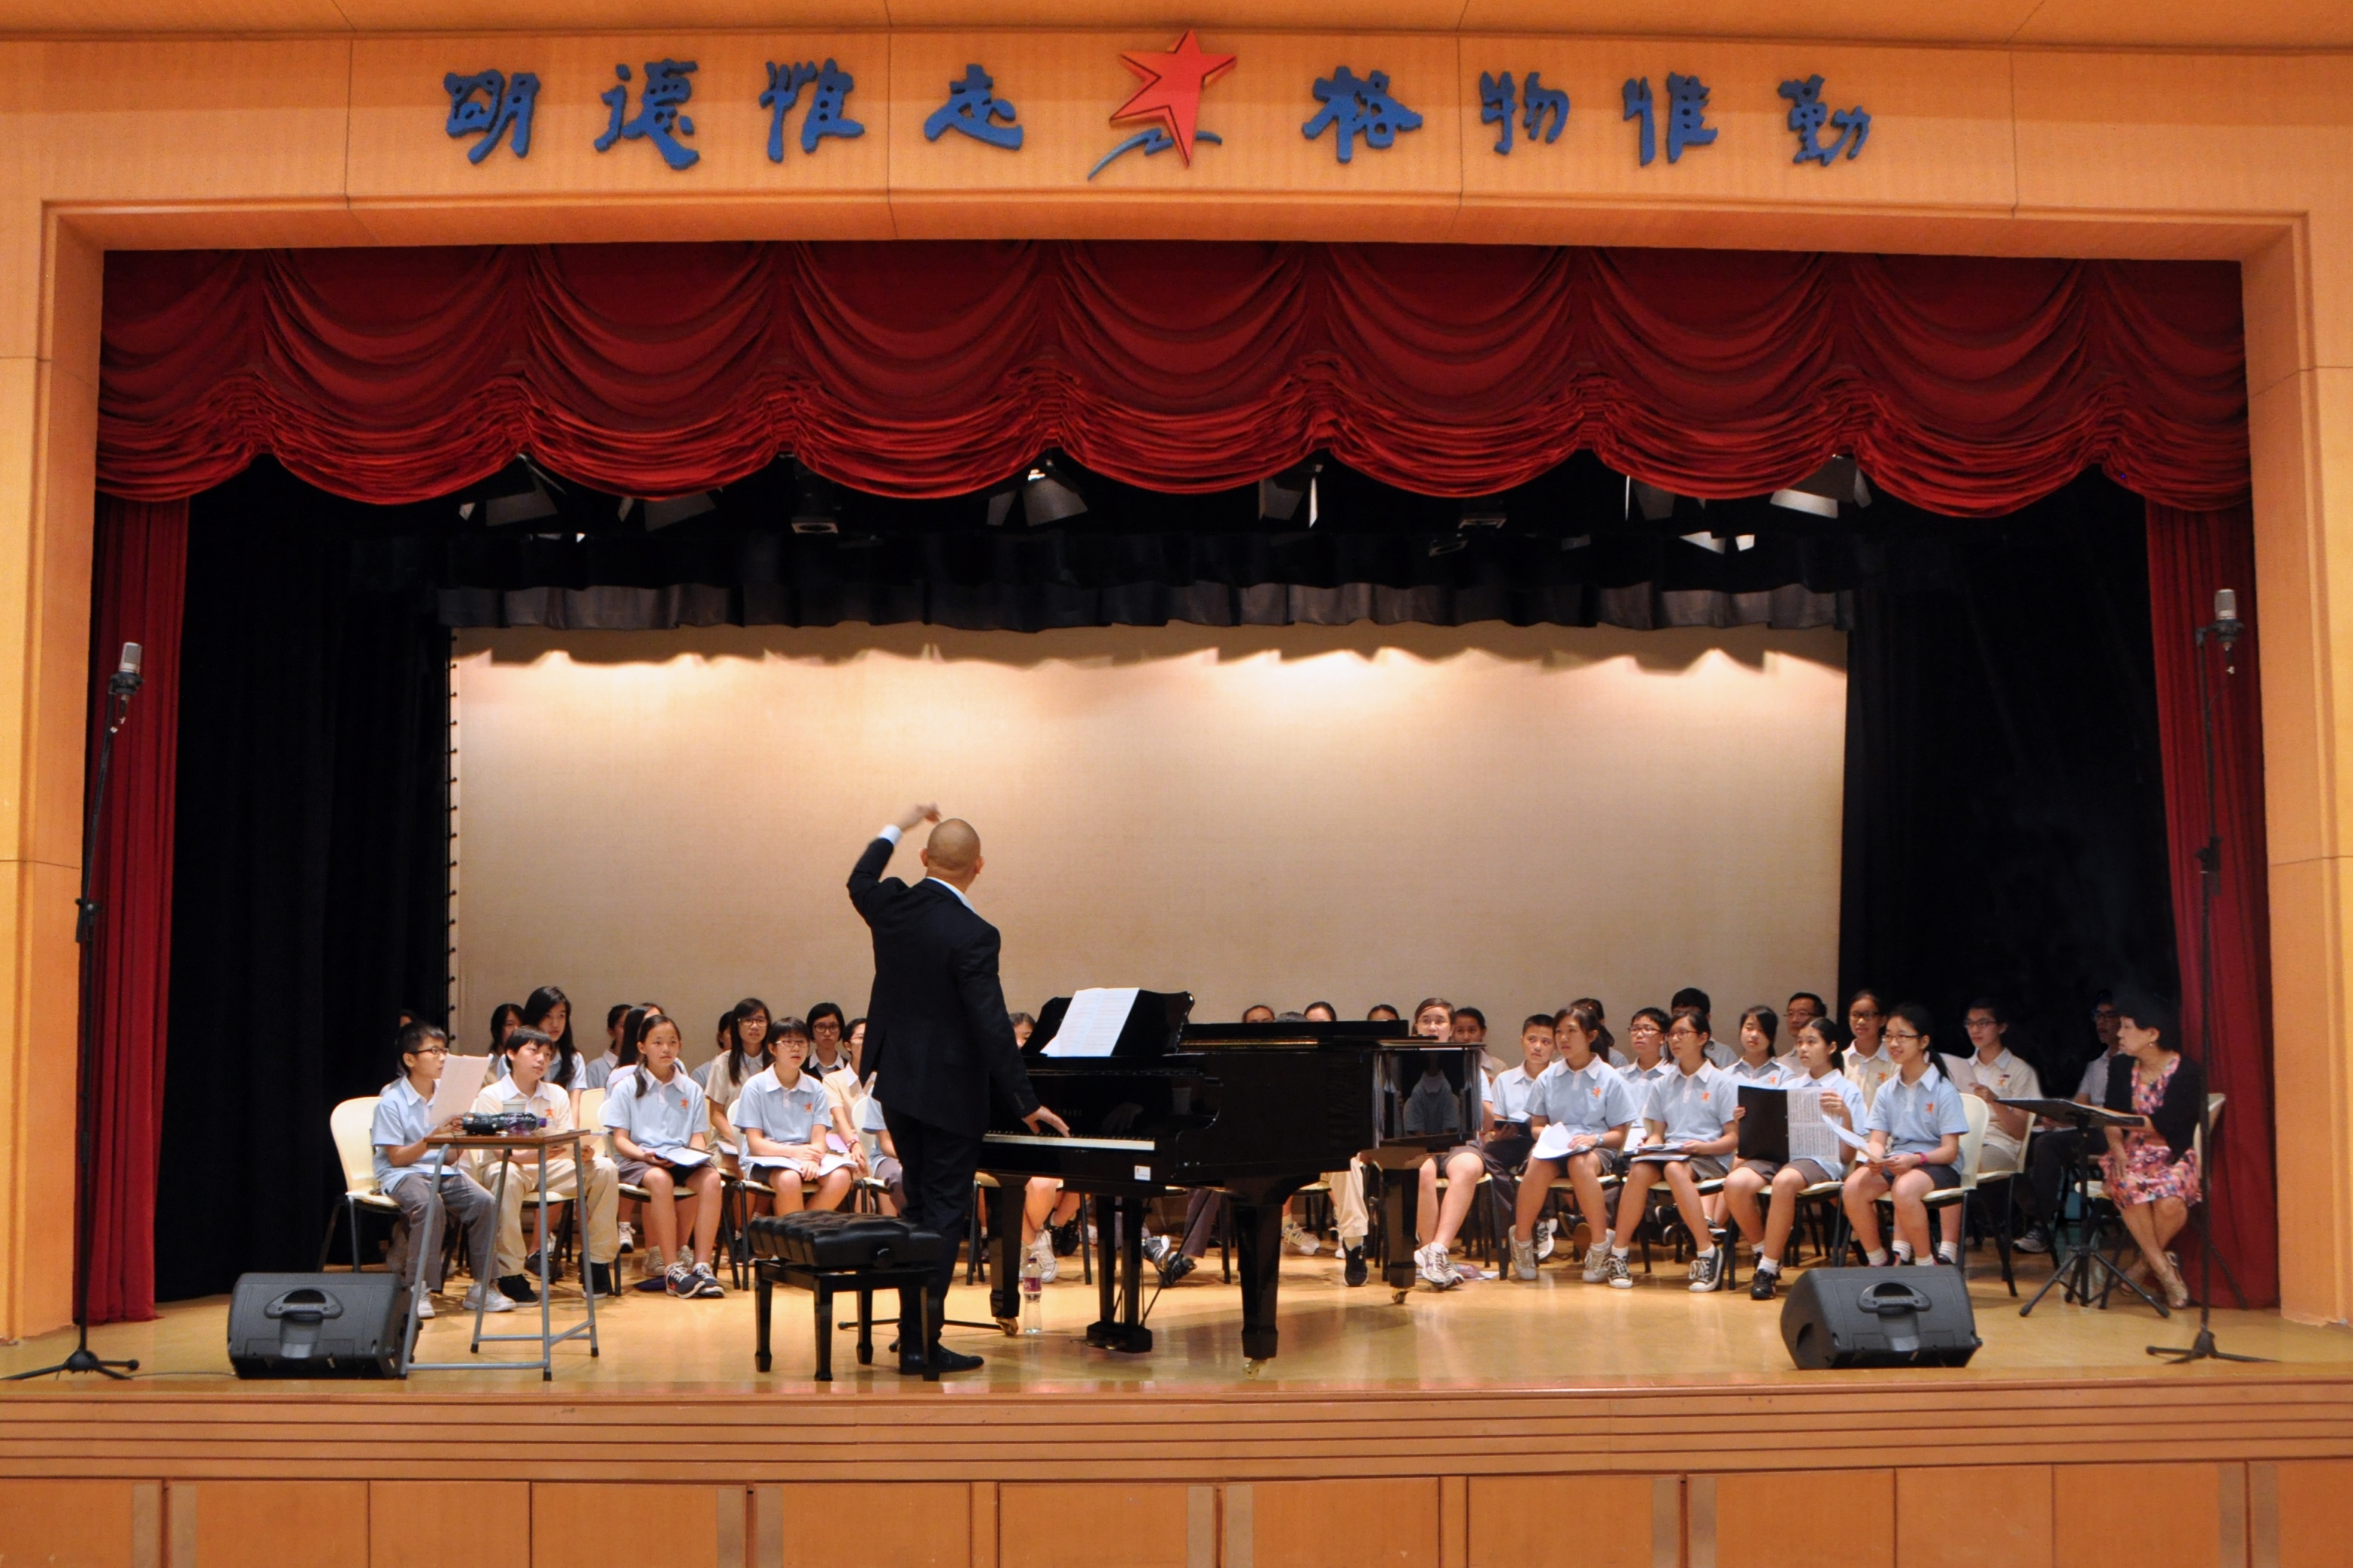 Mr. Jimmy Chiang instructing our choir members